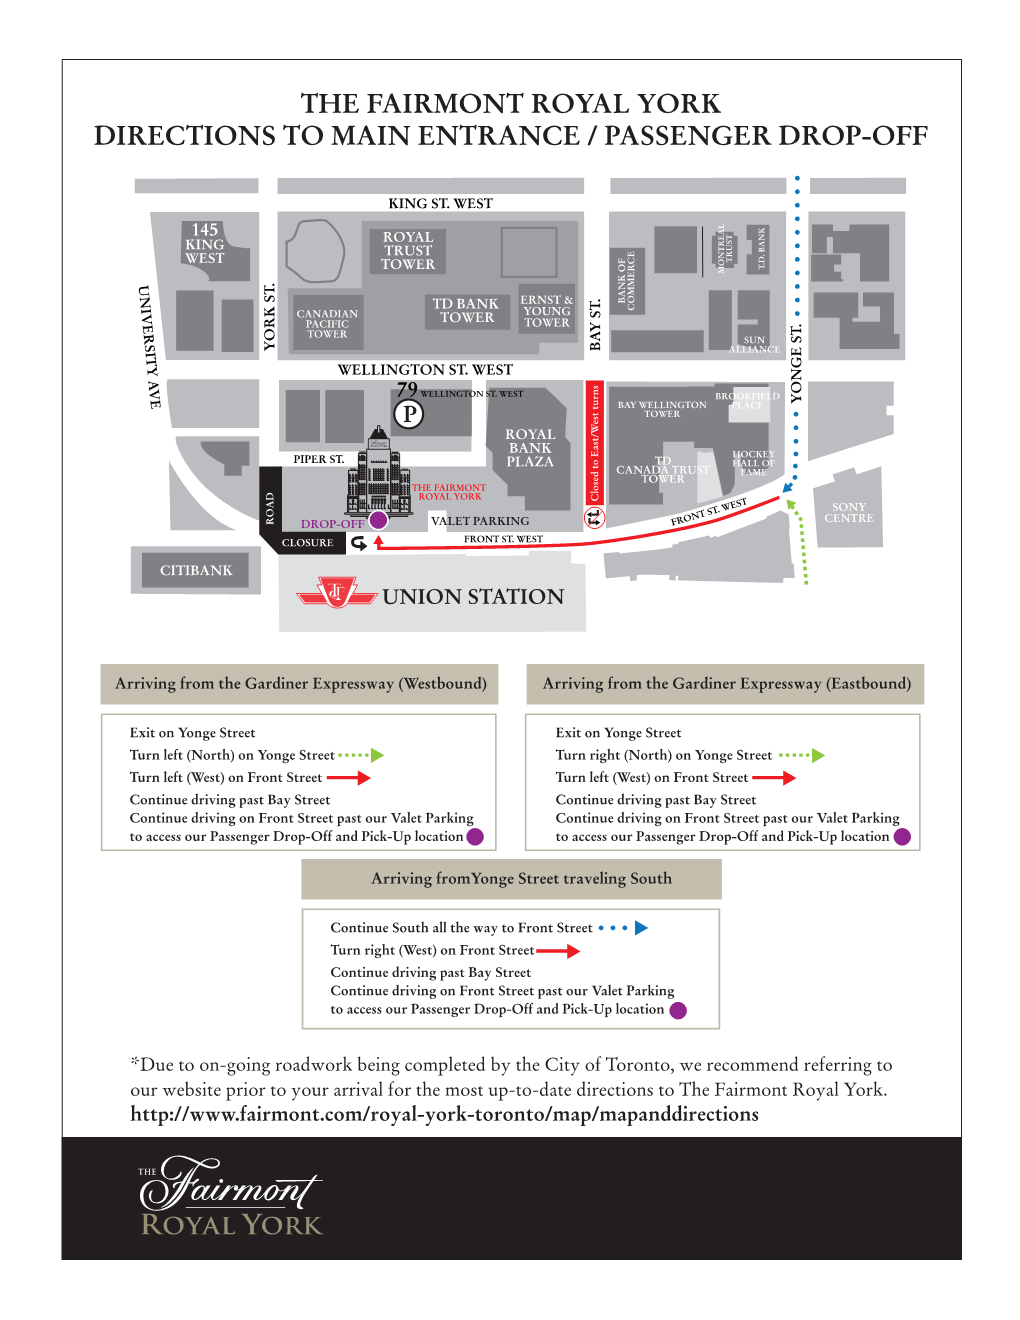 The Fairmont Royal York Directions to Main Entrance / Passenger Drop-Off